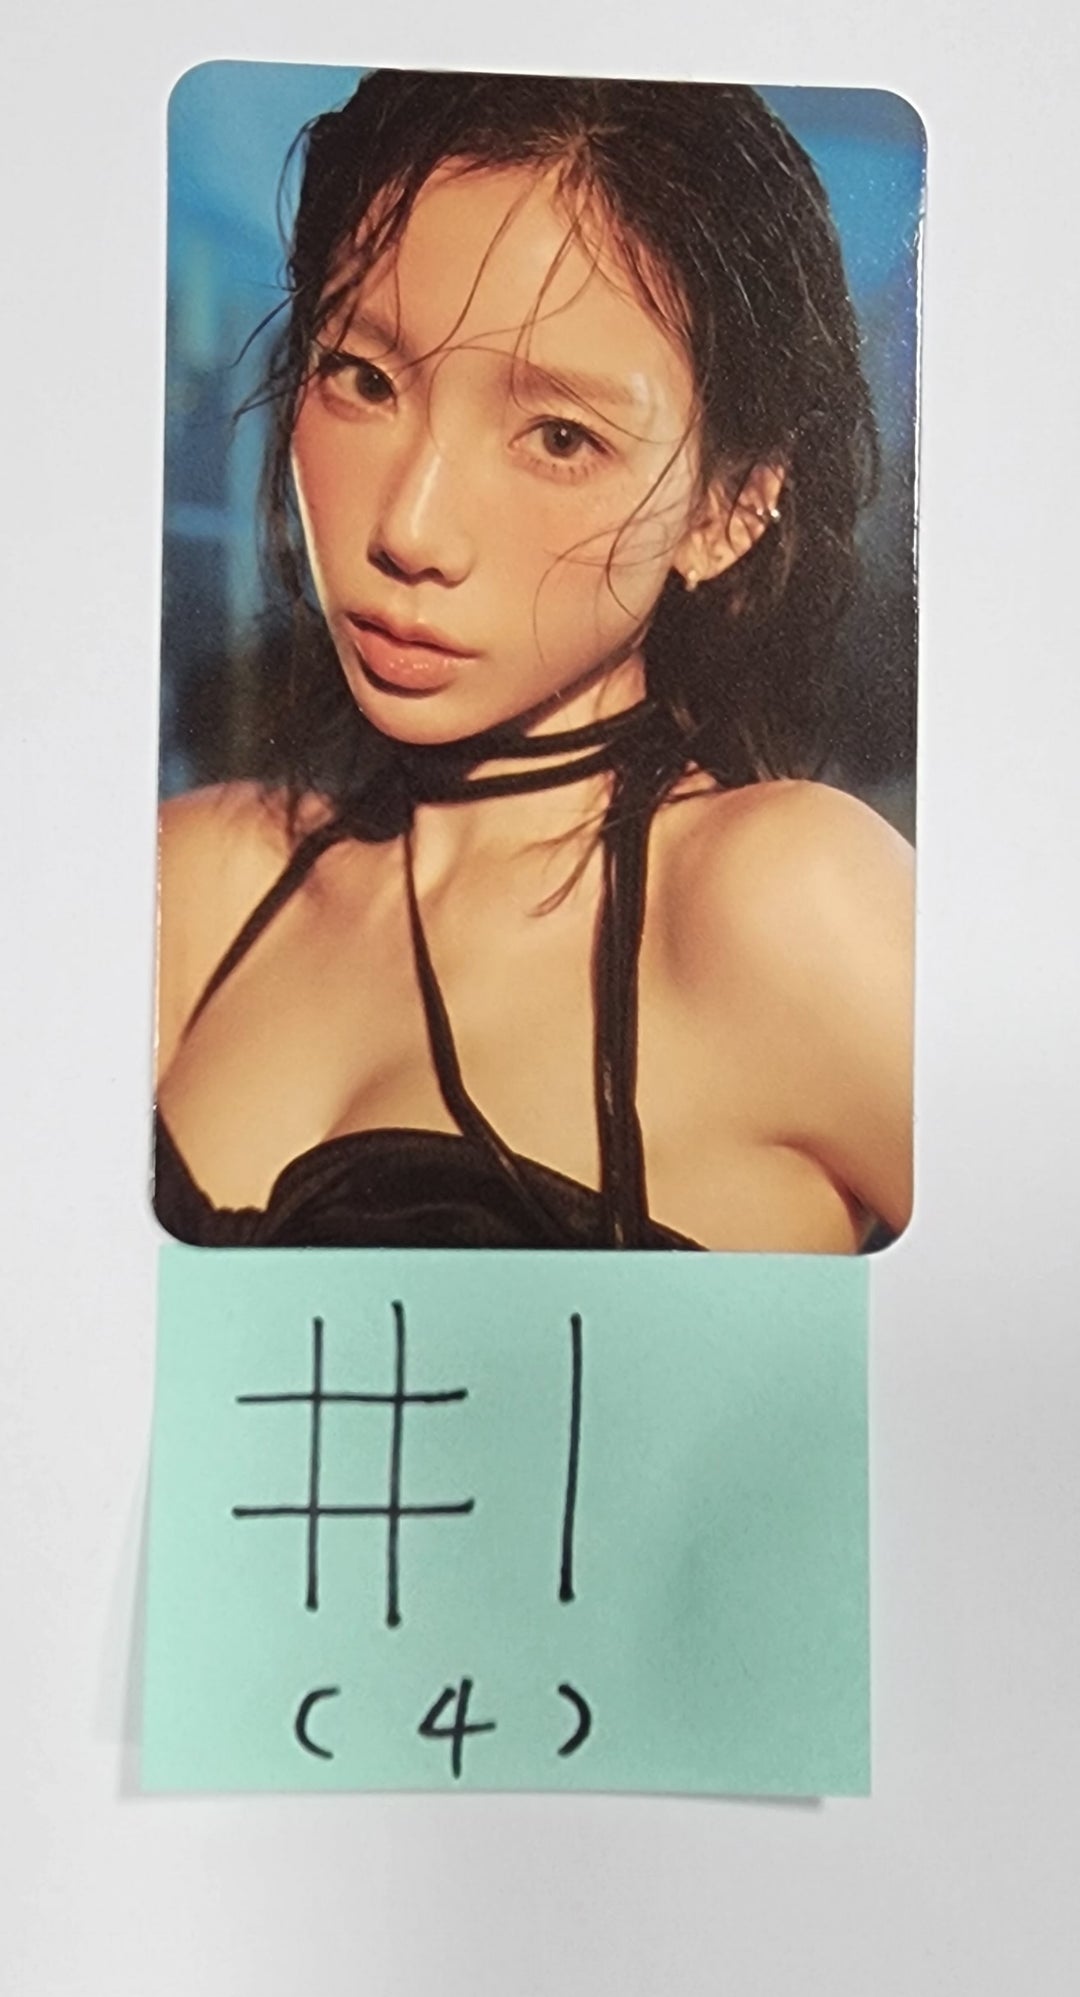 TAEYEON "The ODD Of LOVE" CONCERT - Fortune Scratch Photocard